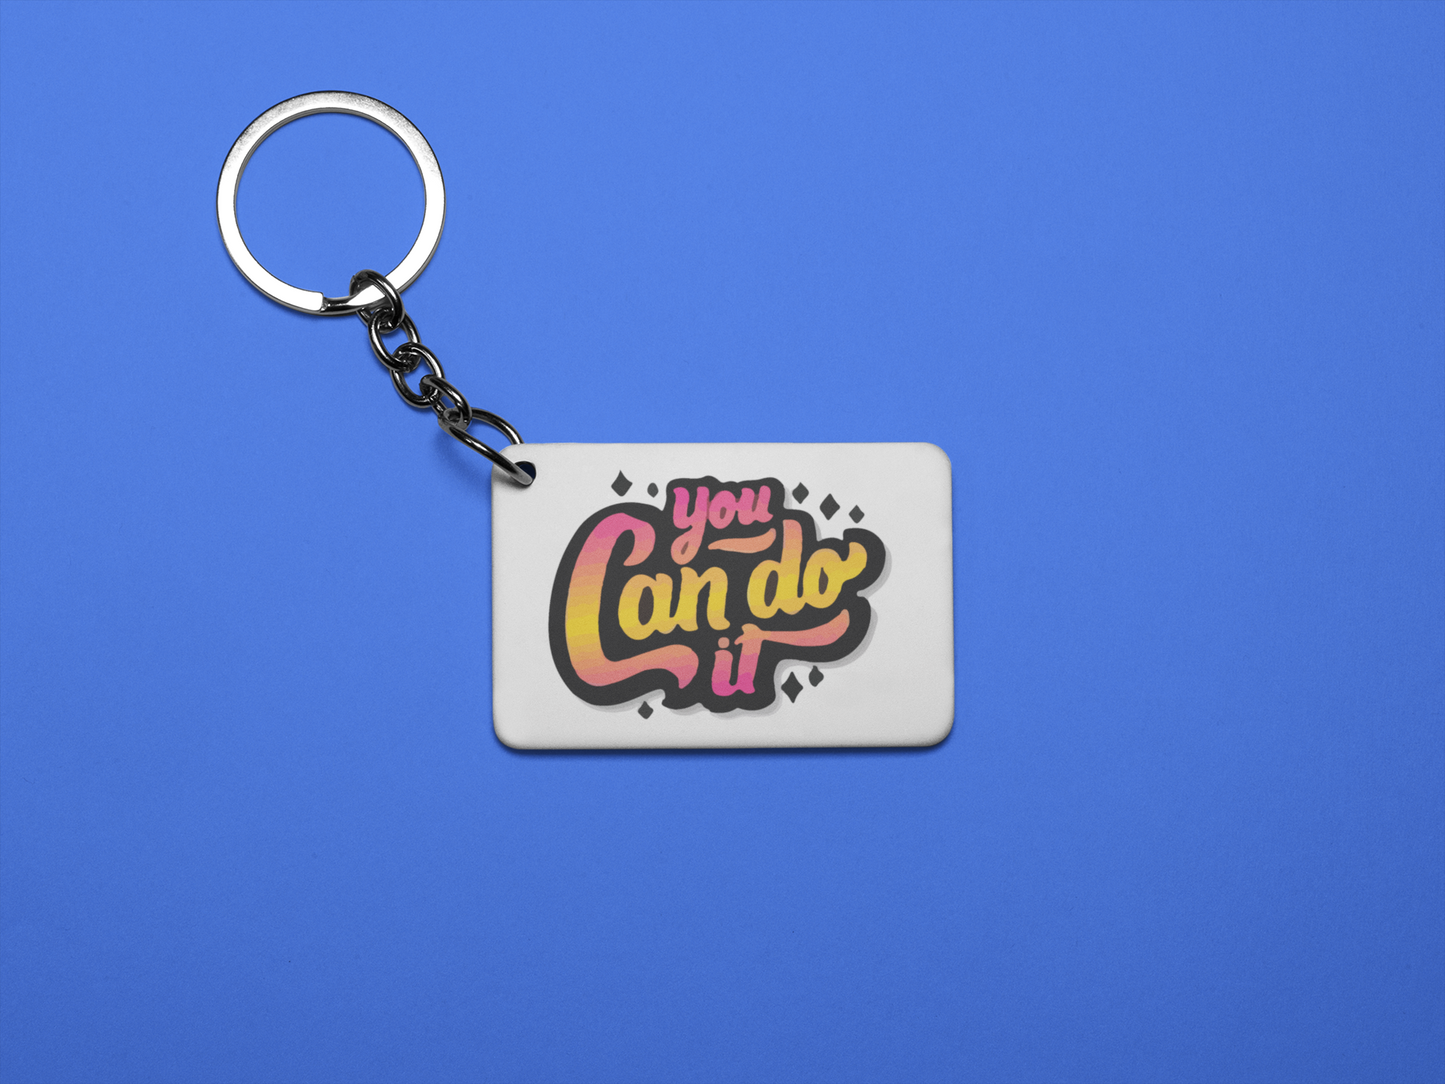 You can do it  keychain